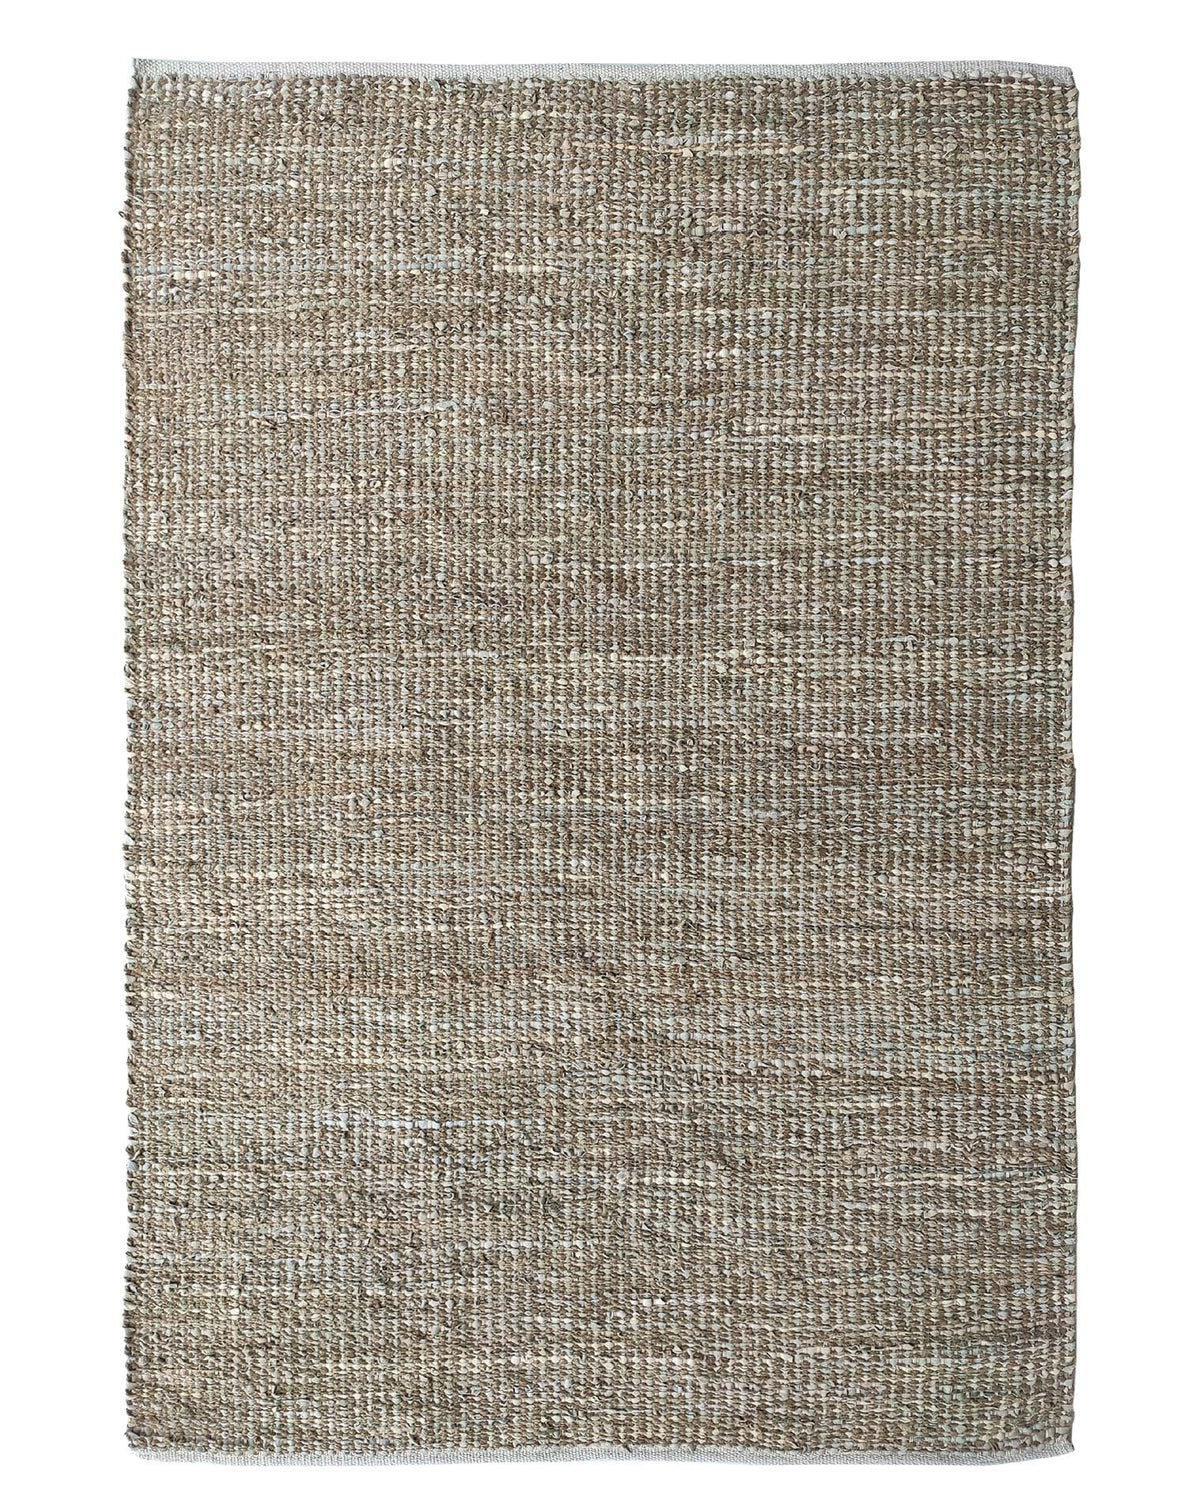 Hand Made Multi Hand Woven Rug (2 Sizes)